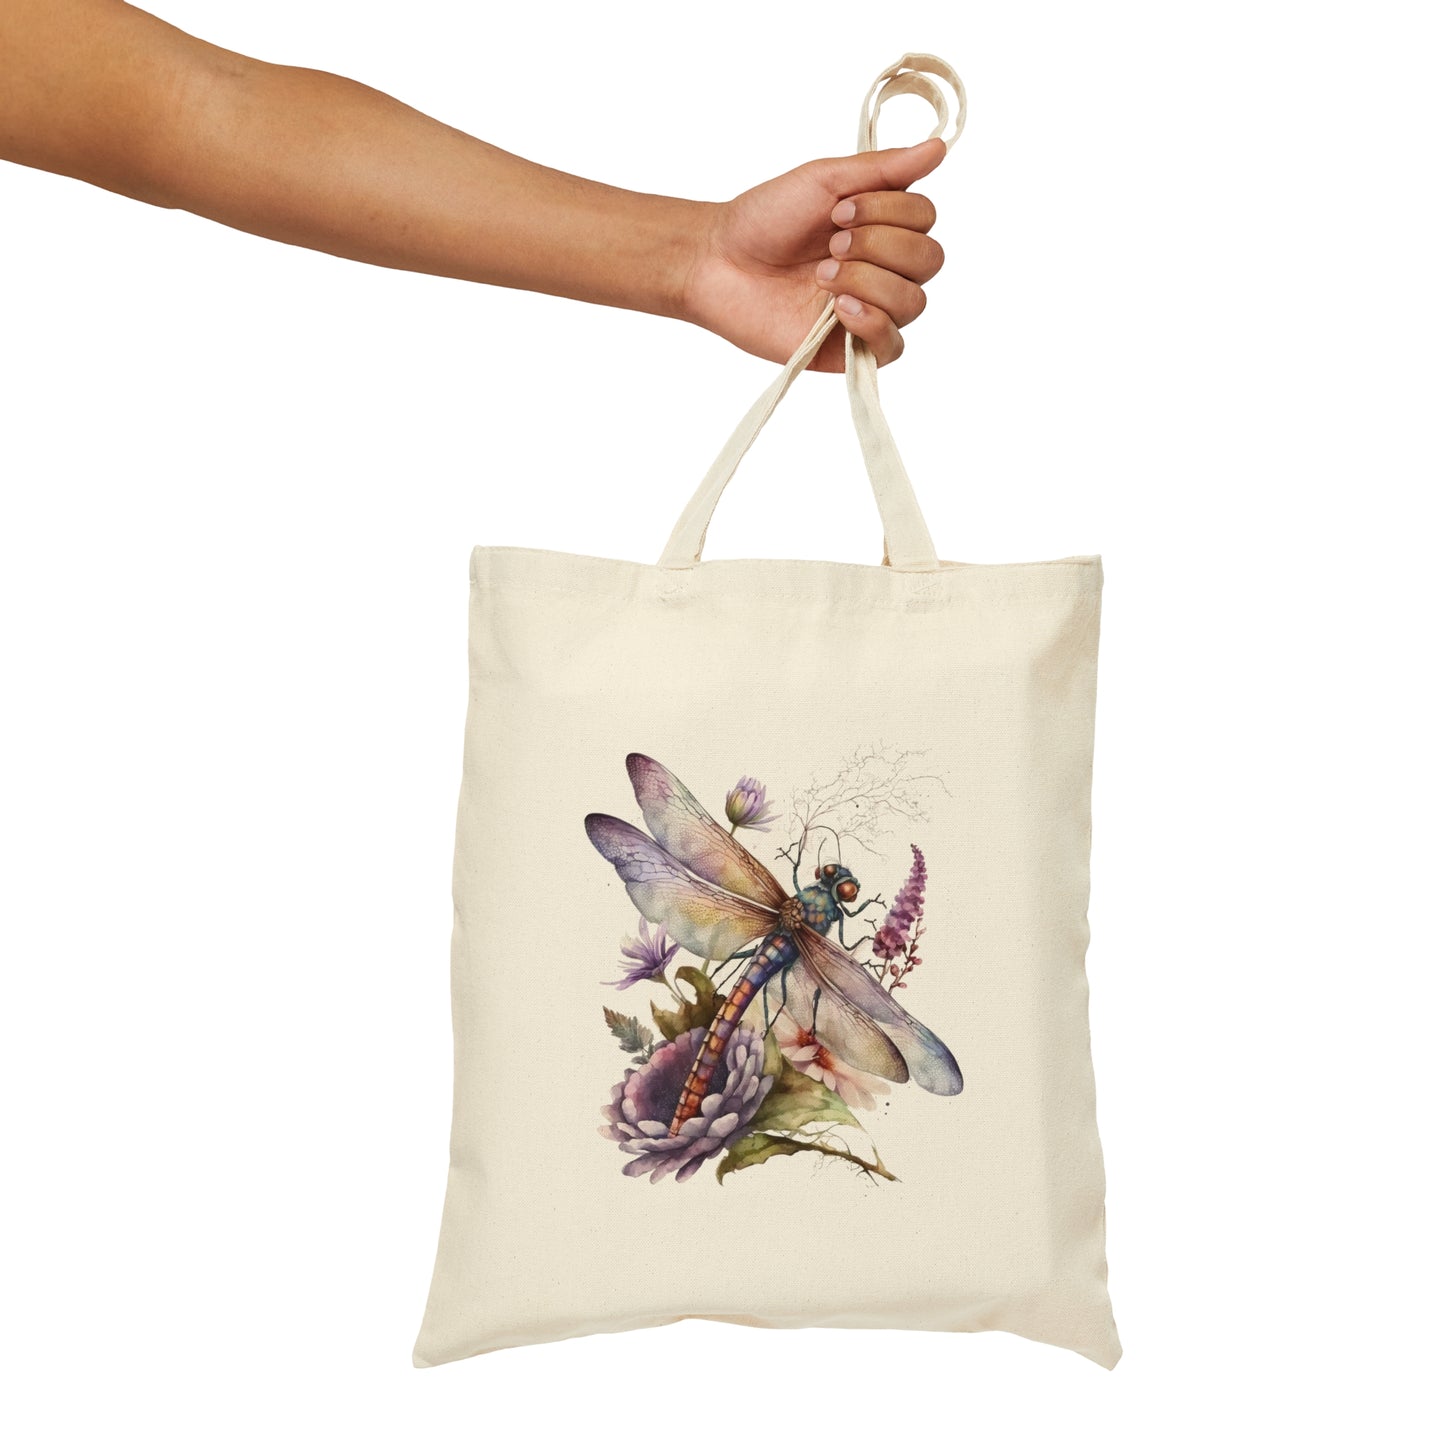 Dragonfly Tote Bag / Personalized Tote Bag